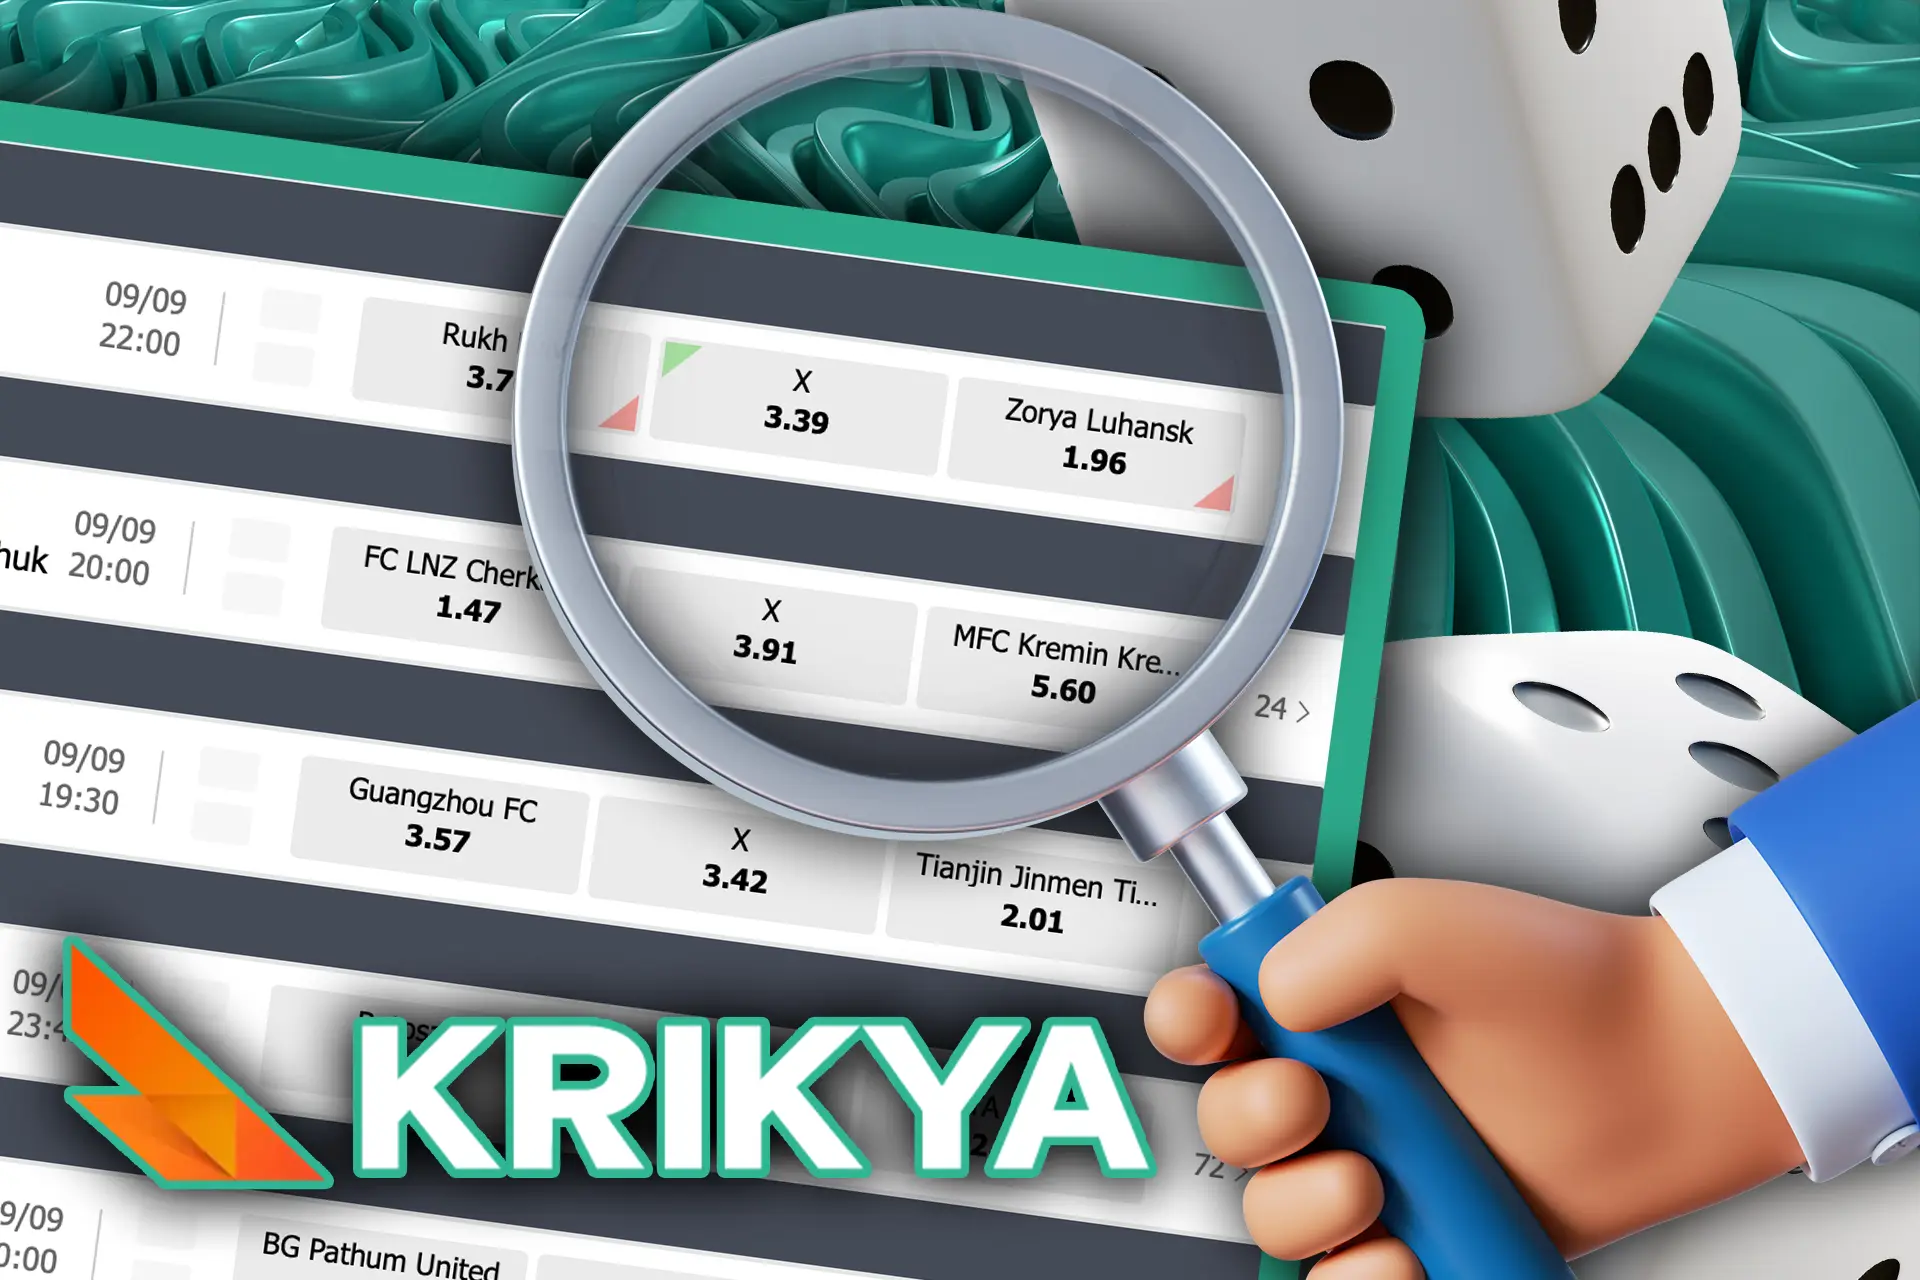 Krikya had profitable odds on different types of sports.